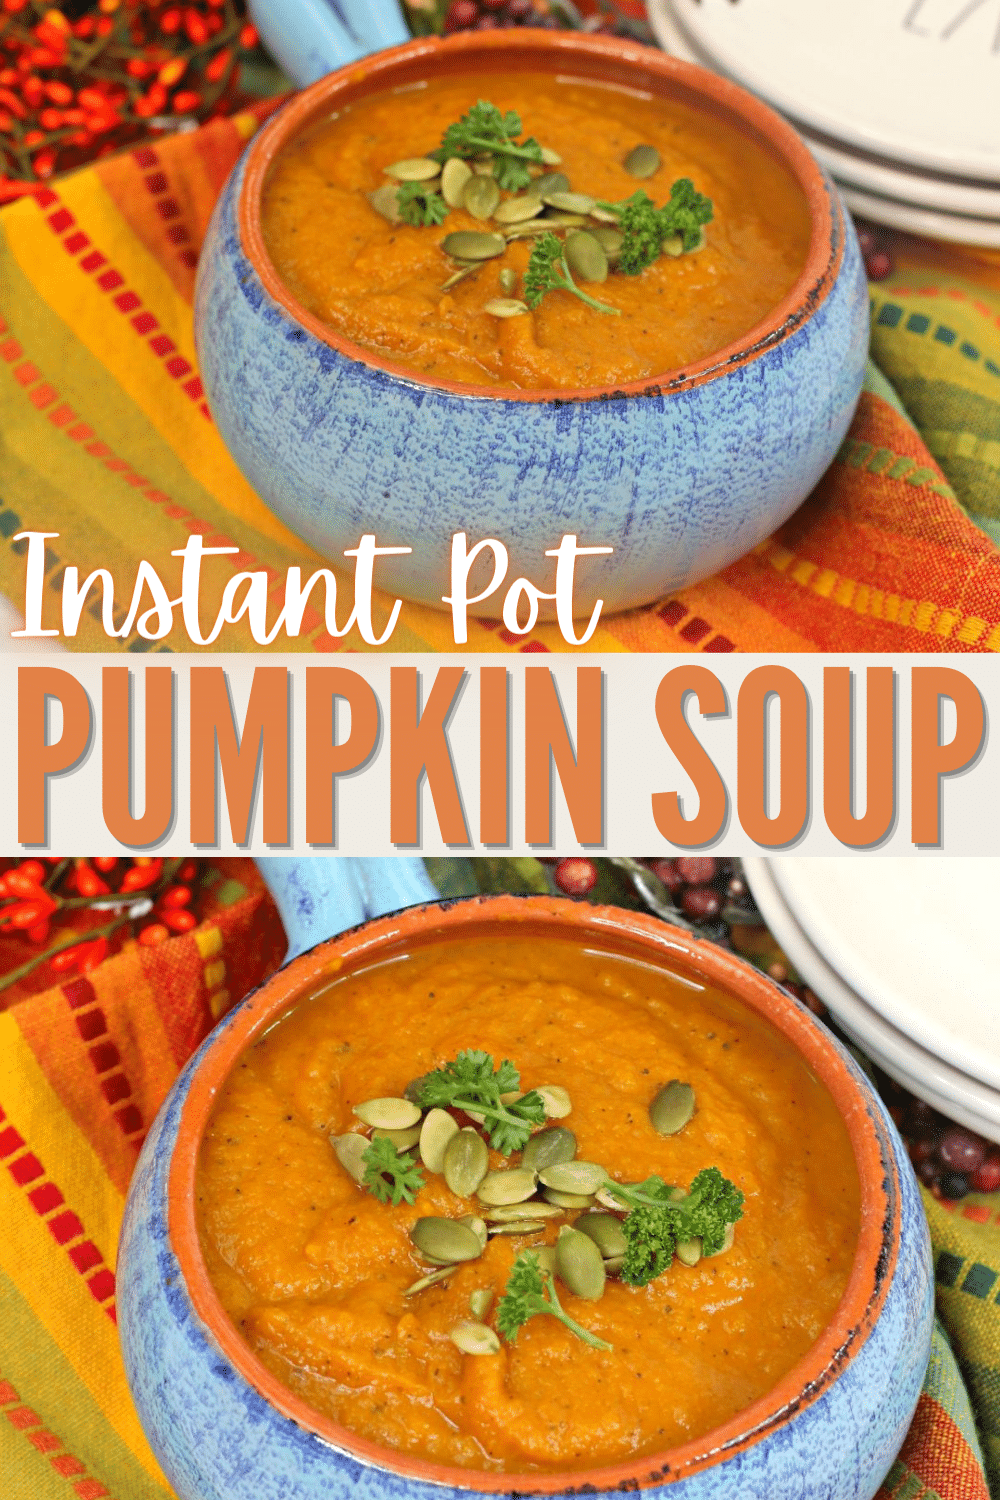 Instant Pot Pumpkin Soup is so simple to make, and is bursting with delicious flavor. This creamy soup is perfect for a chilly fall day. #instantpot #pressurecooker #fall #pumpkin #soup #recipe via @wondermomwannab